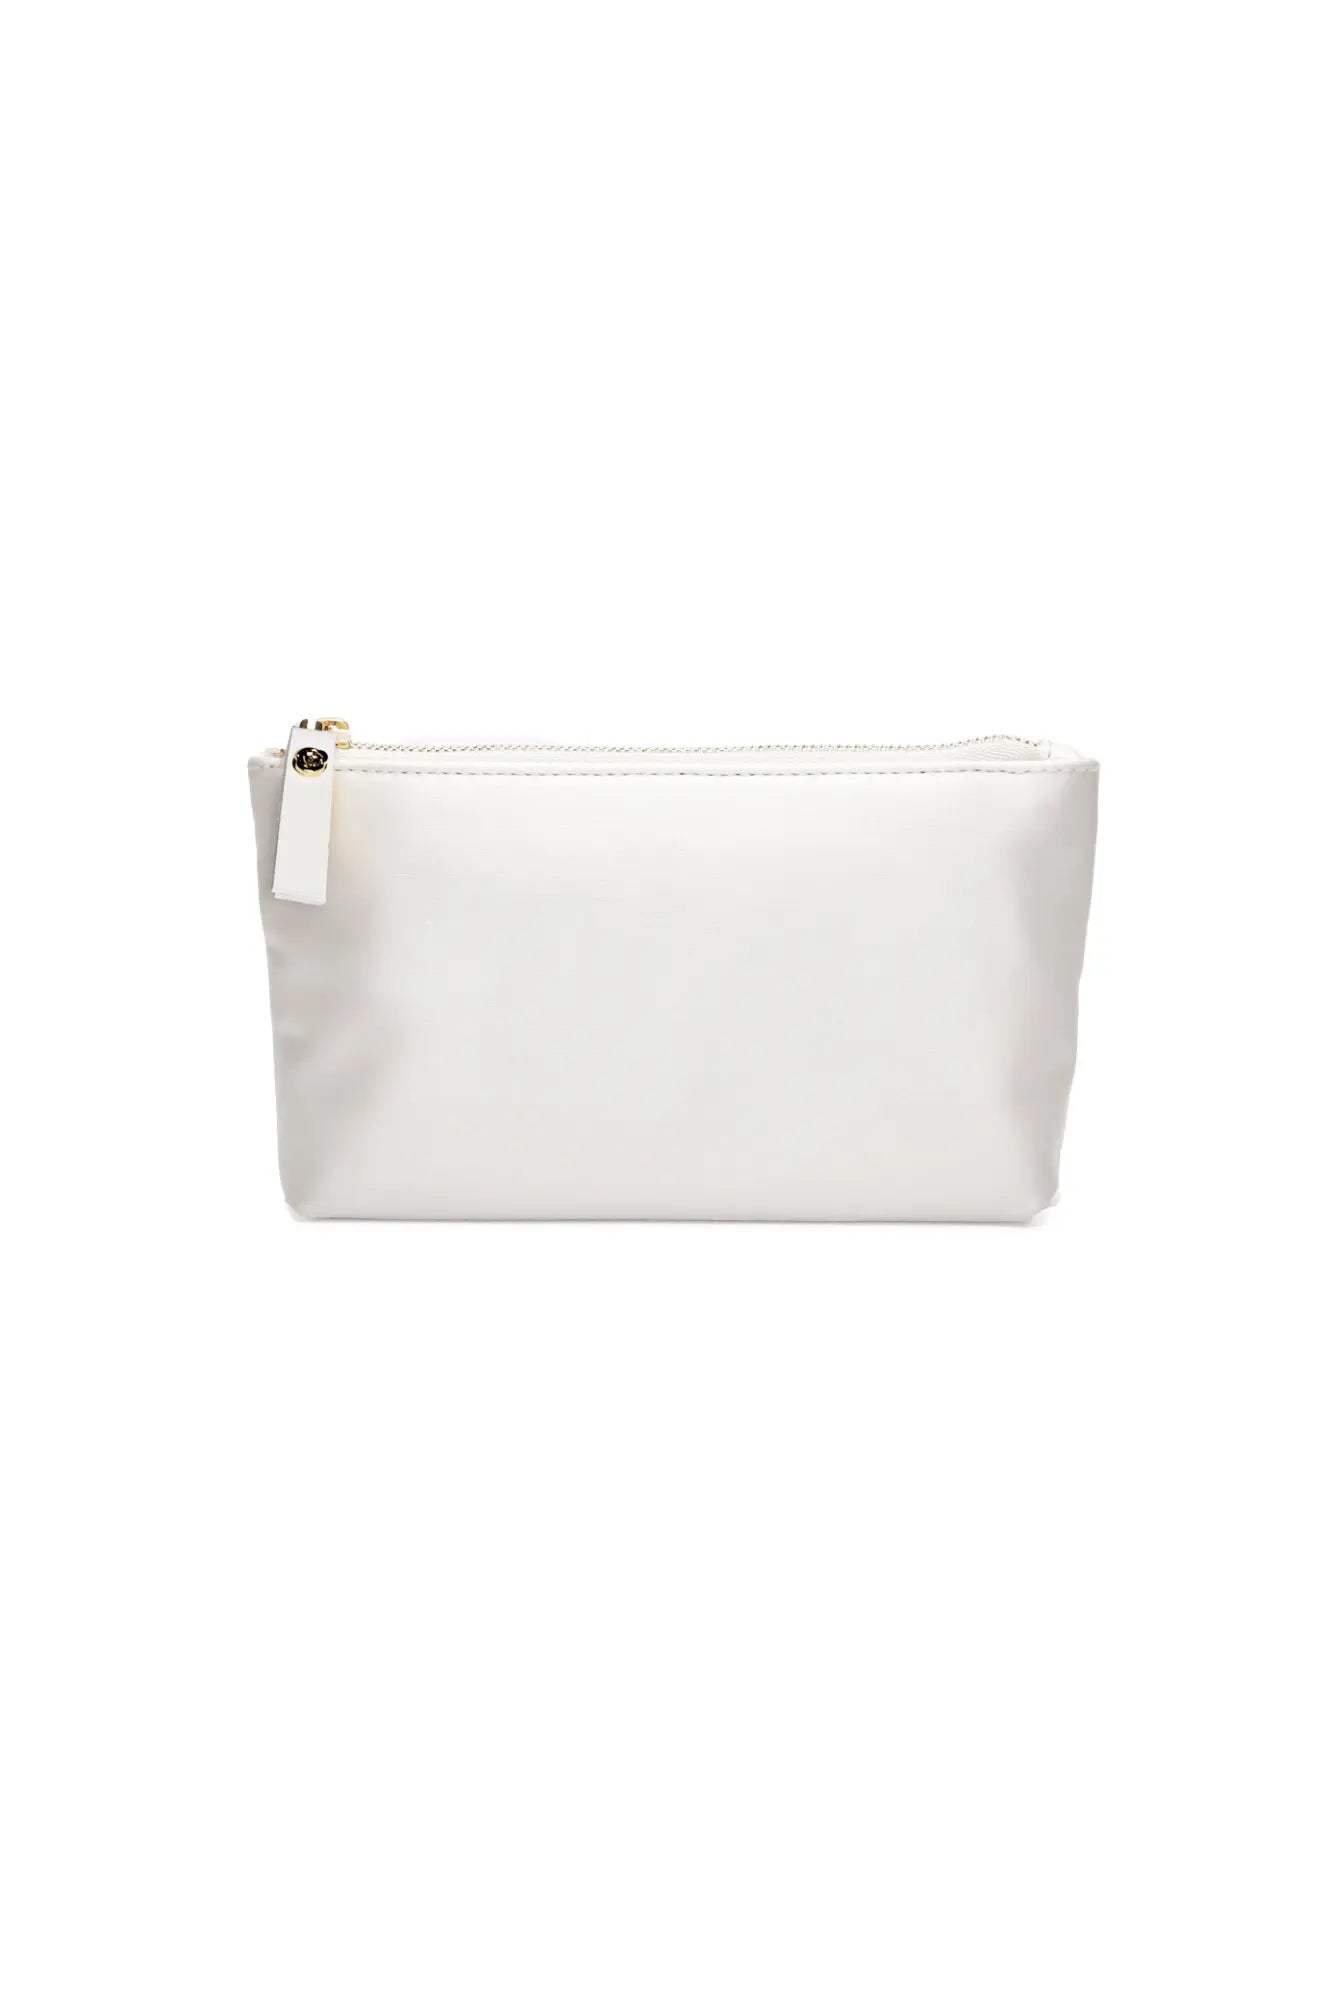 An Italian Mia Acrylic Clutch with Ivory Satin Zipper Pouch isolated on a white background from The Bella Rosa Collection.